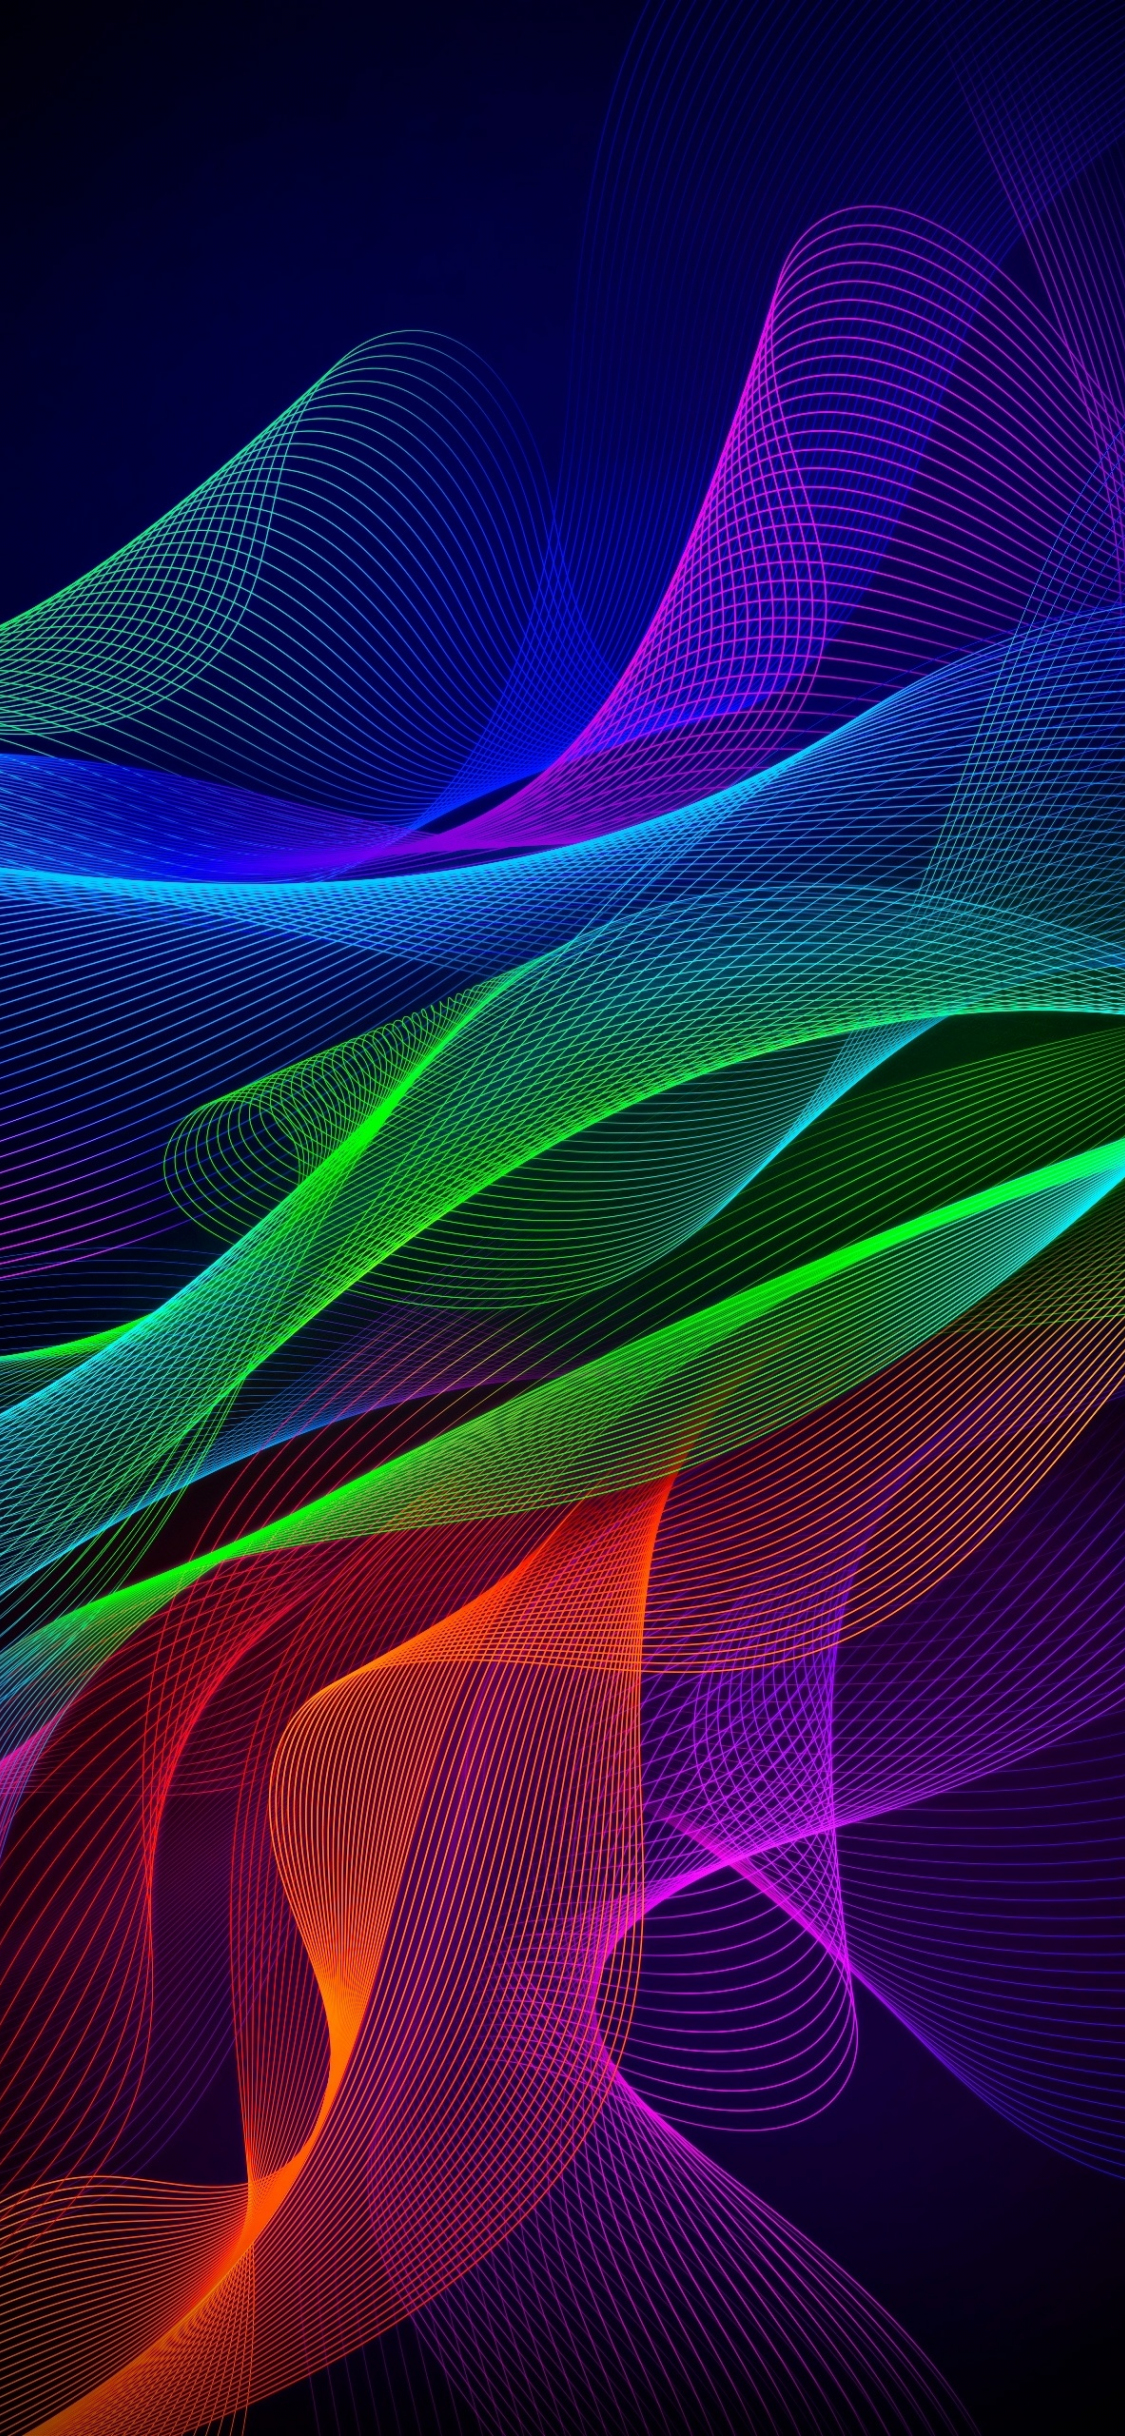 Download 1125x2436 Wallpaper Colorful Lines Abstract Razer Phone Stock Iphone X 1125x2436 Hd Image Background